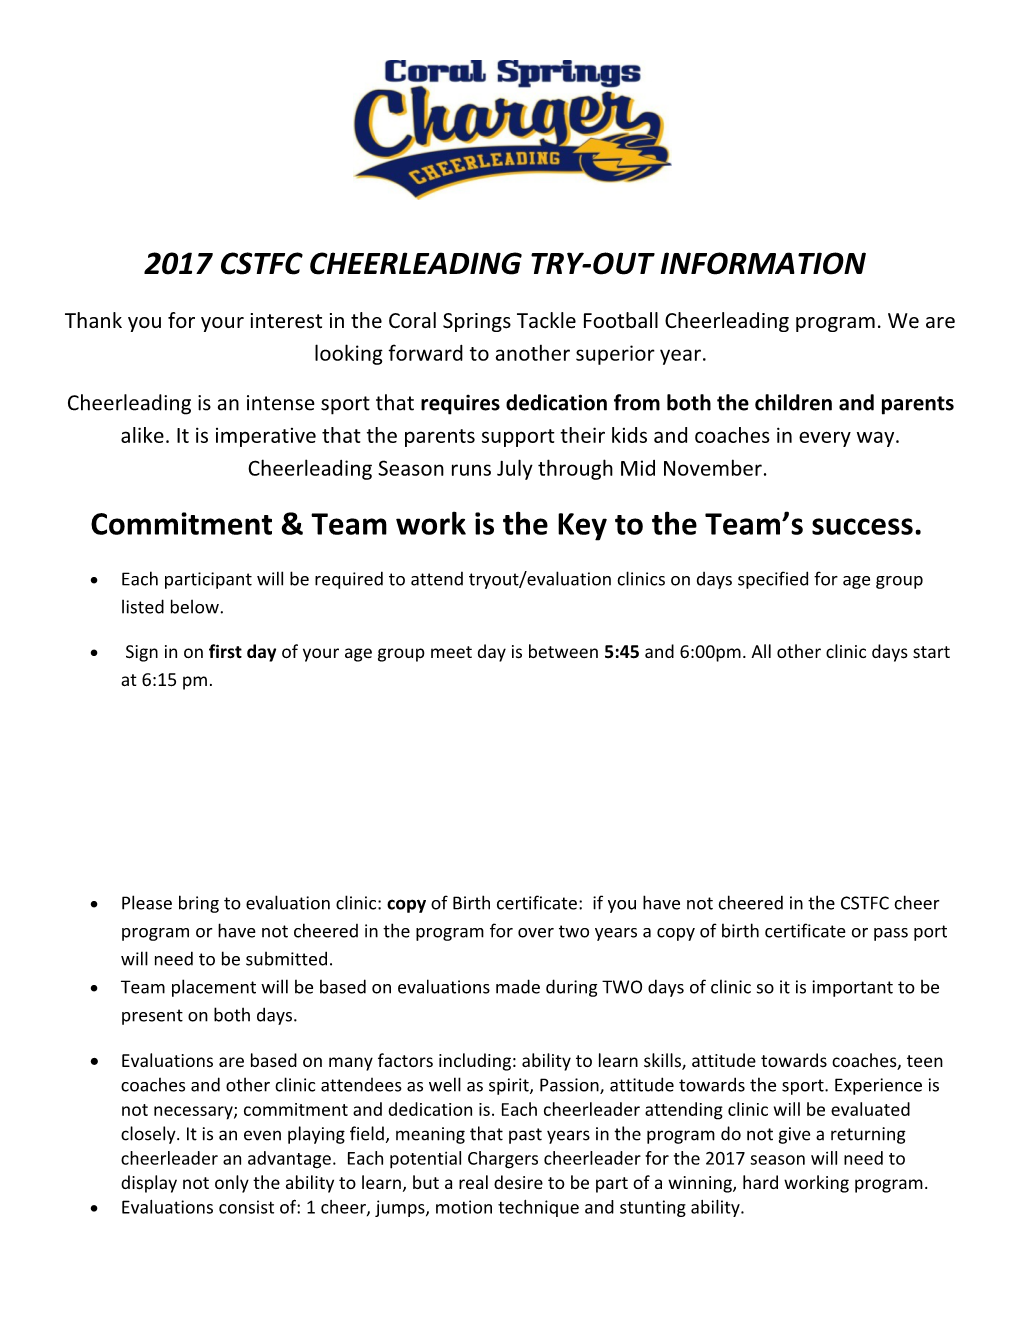 2017 Cstfc Cheerleading Try-Out Information